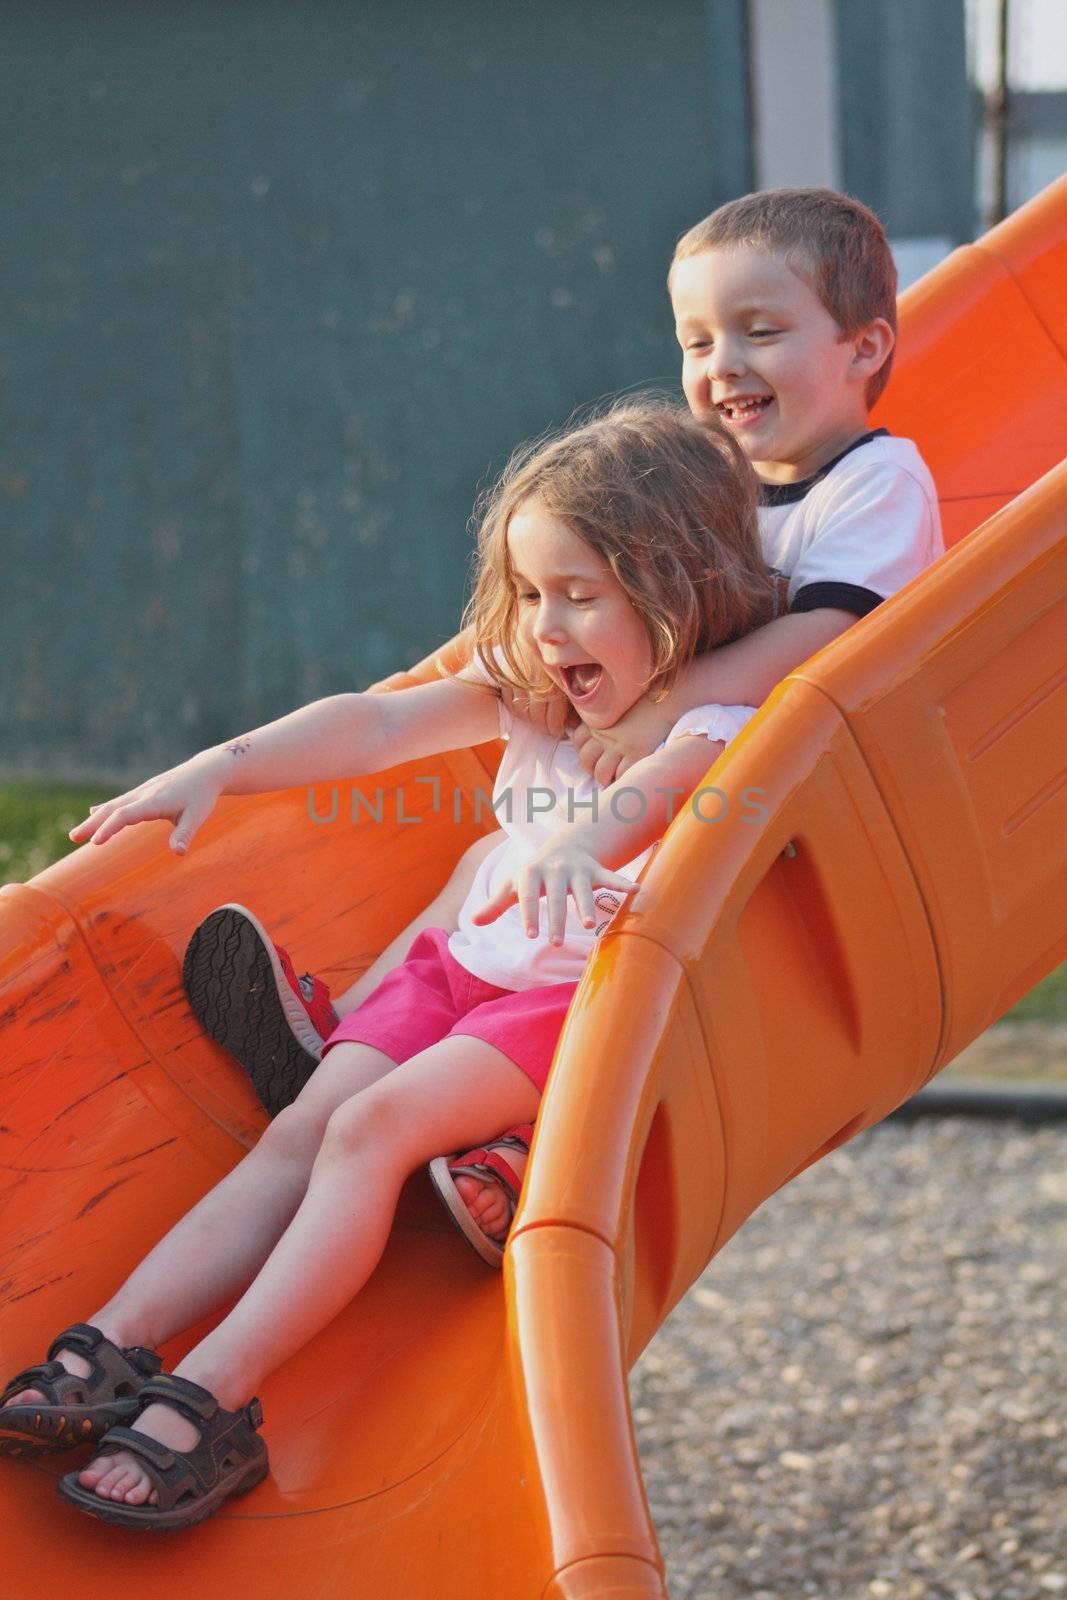 Brother and sister sliding down